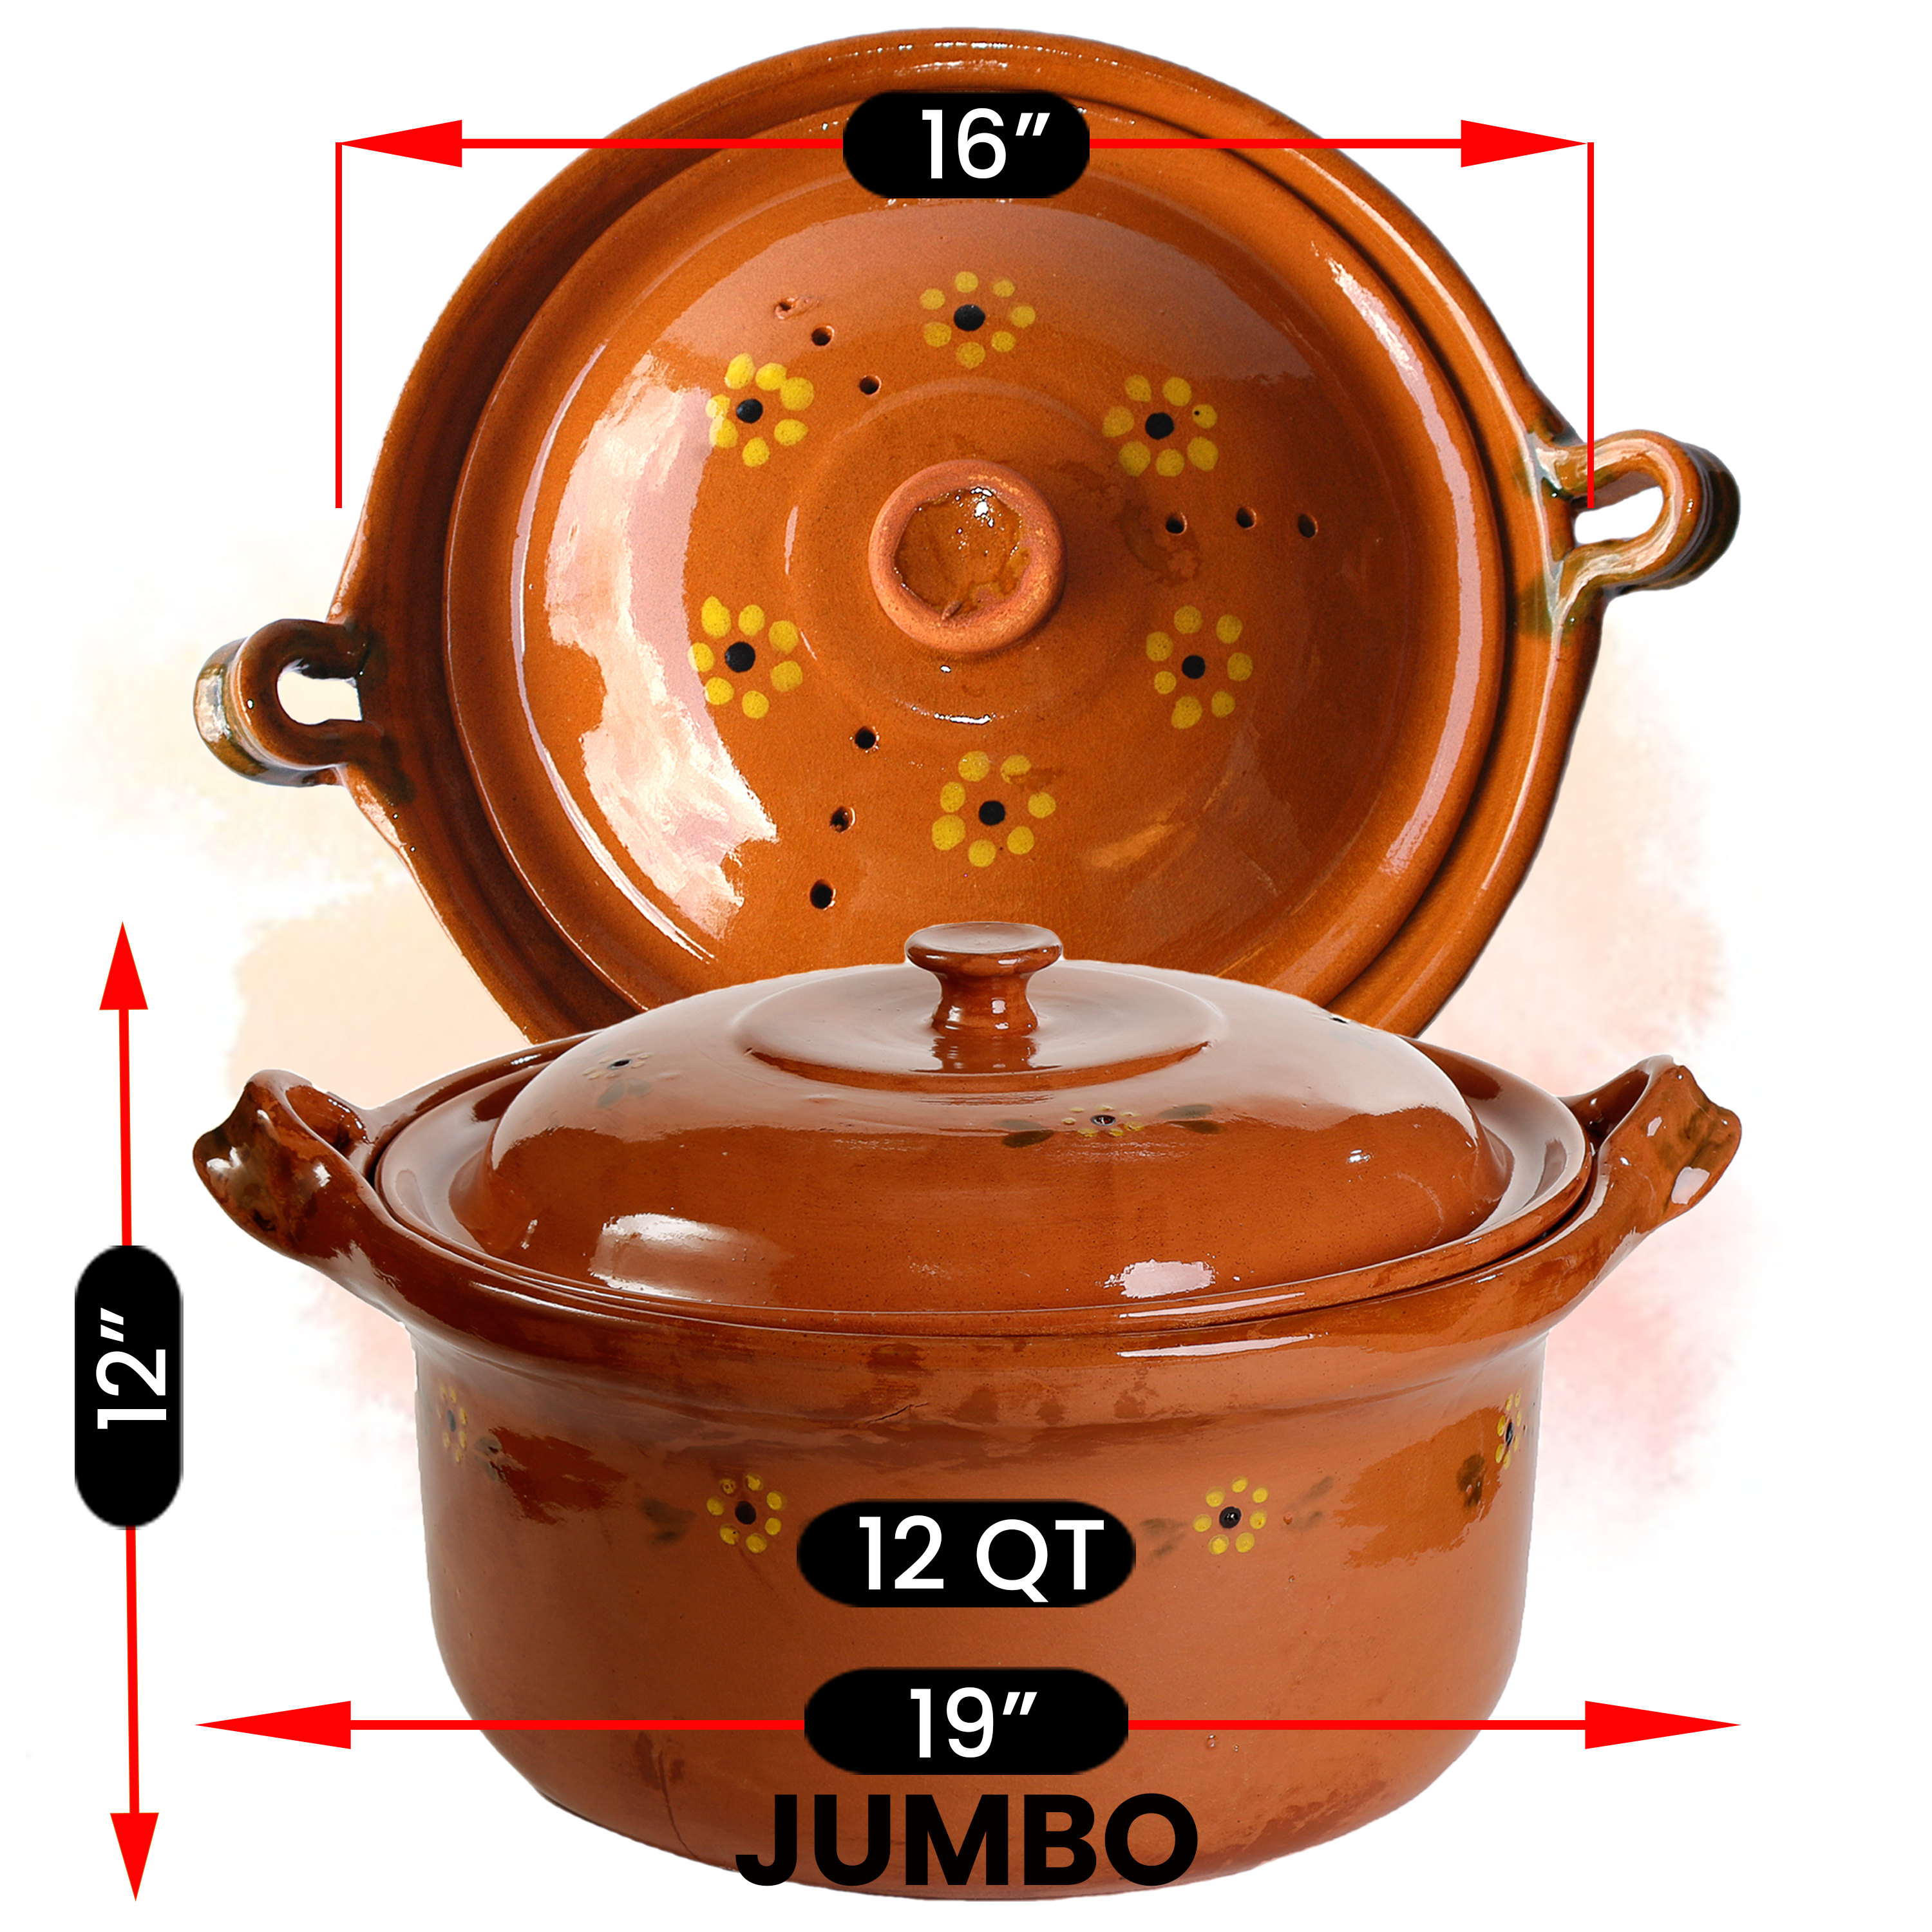 https://ancientcookware.com/images/stories/virtuemart/product/mex_3030_20_5_Large_with_measurements9.jpg